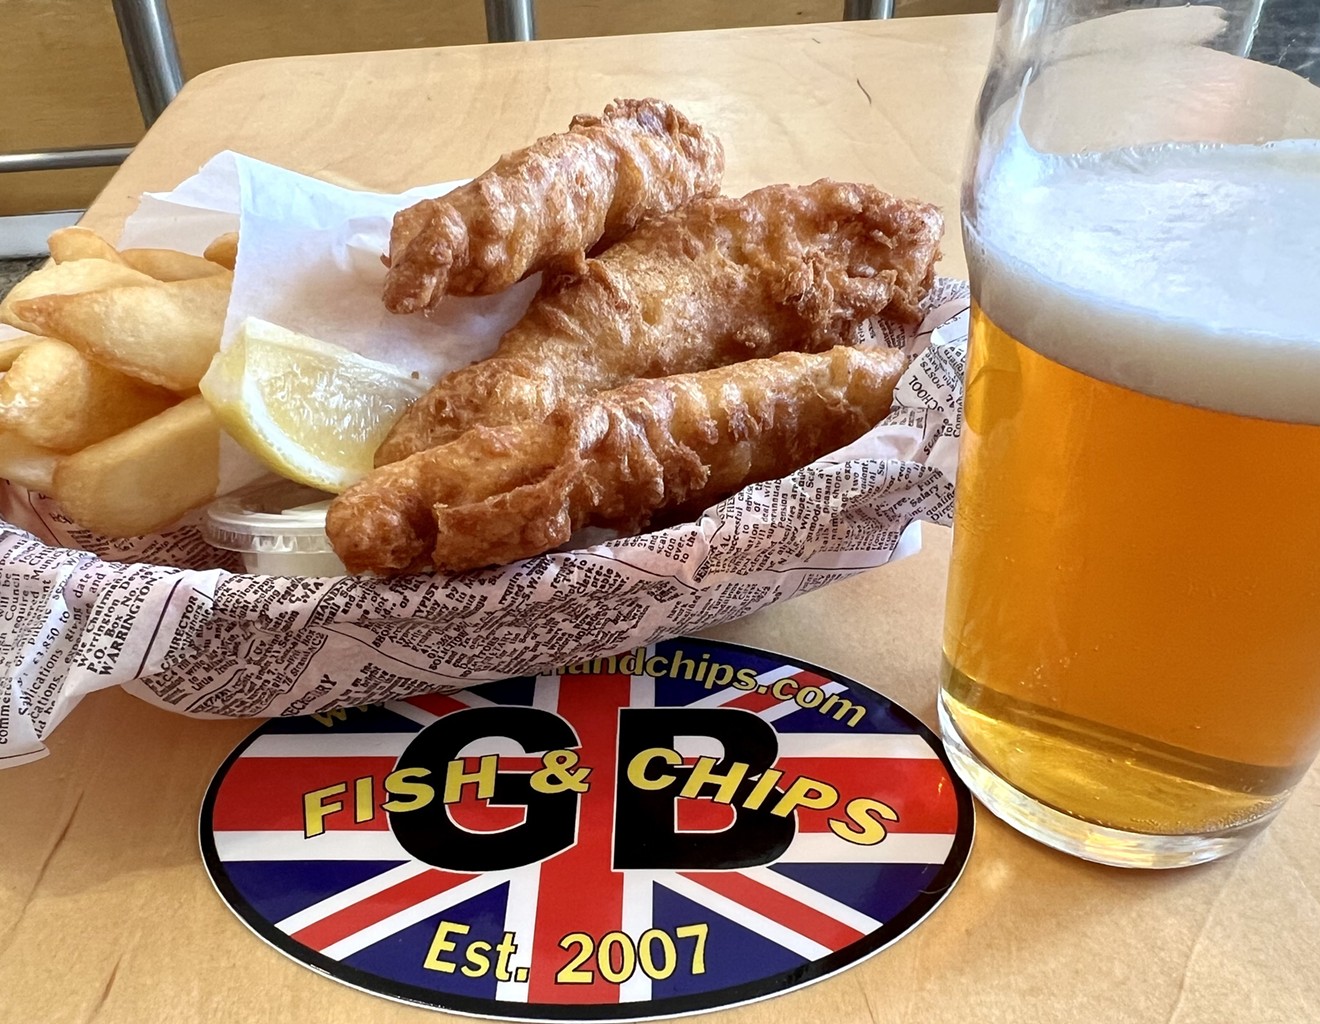 Hit up tilapia Tuesday at GB Fish & Chip for a cheap deal.